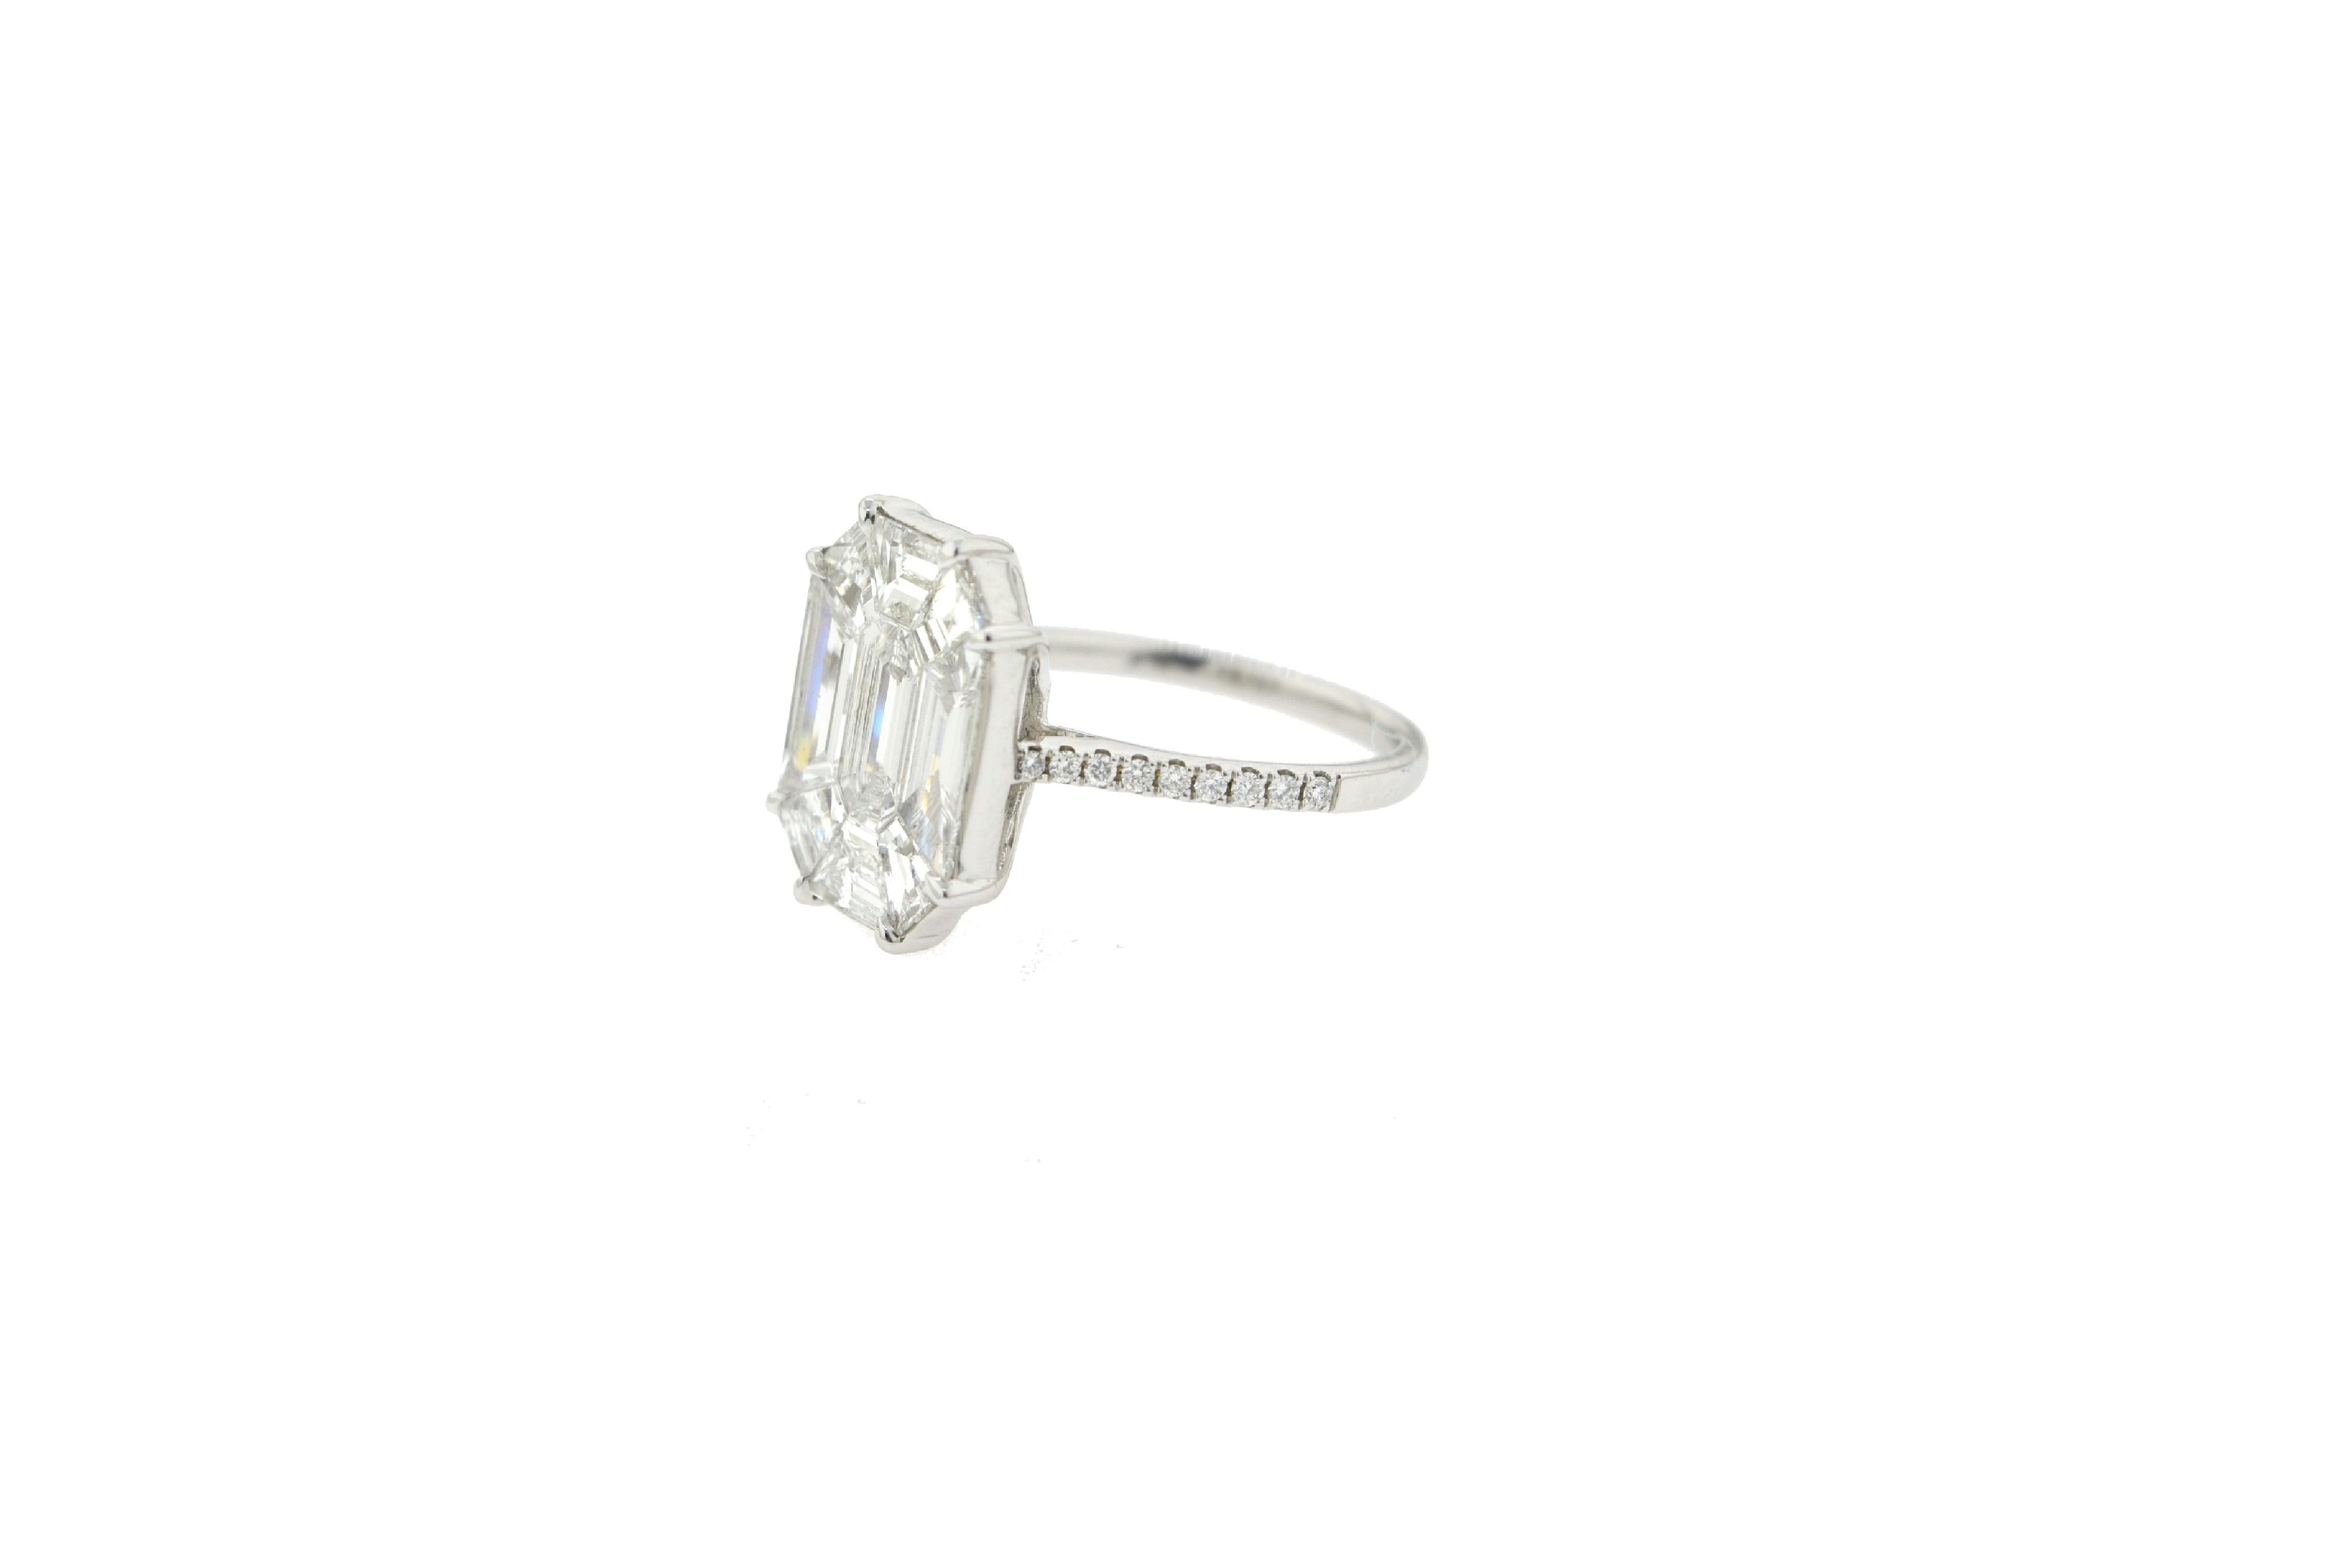 JR 3.16 Carat Emerald Cut Illusion Diamond Ring 18 Karat White Gold

Emerald, Baguette and Trapezoid shaped diamonds set in an illusion to create the look of a 9 carat single emerald cut stone. The ring is set in 18 Karat white gold. The color of